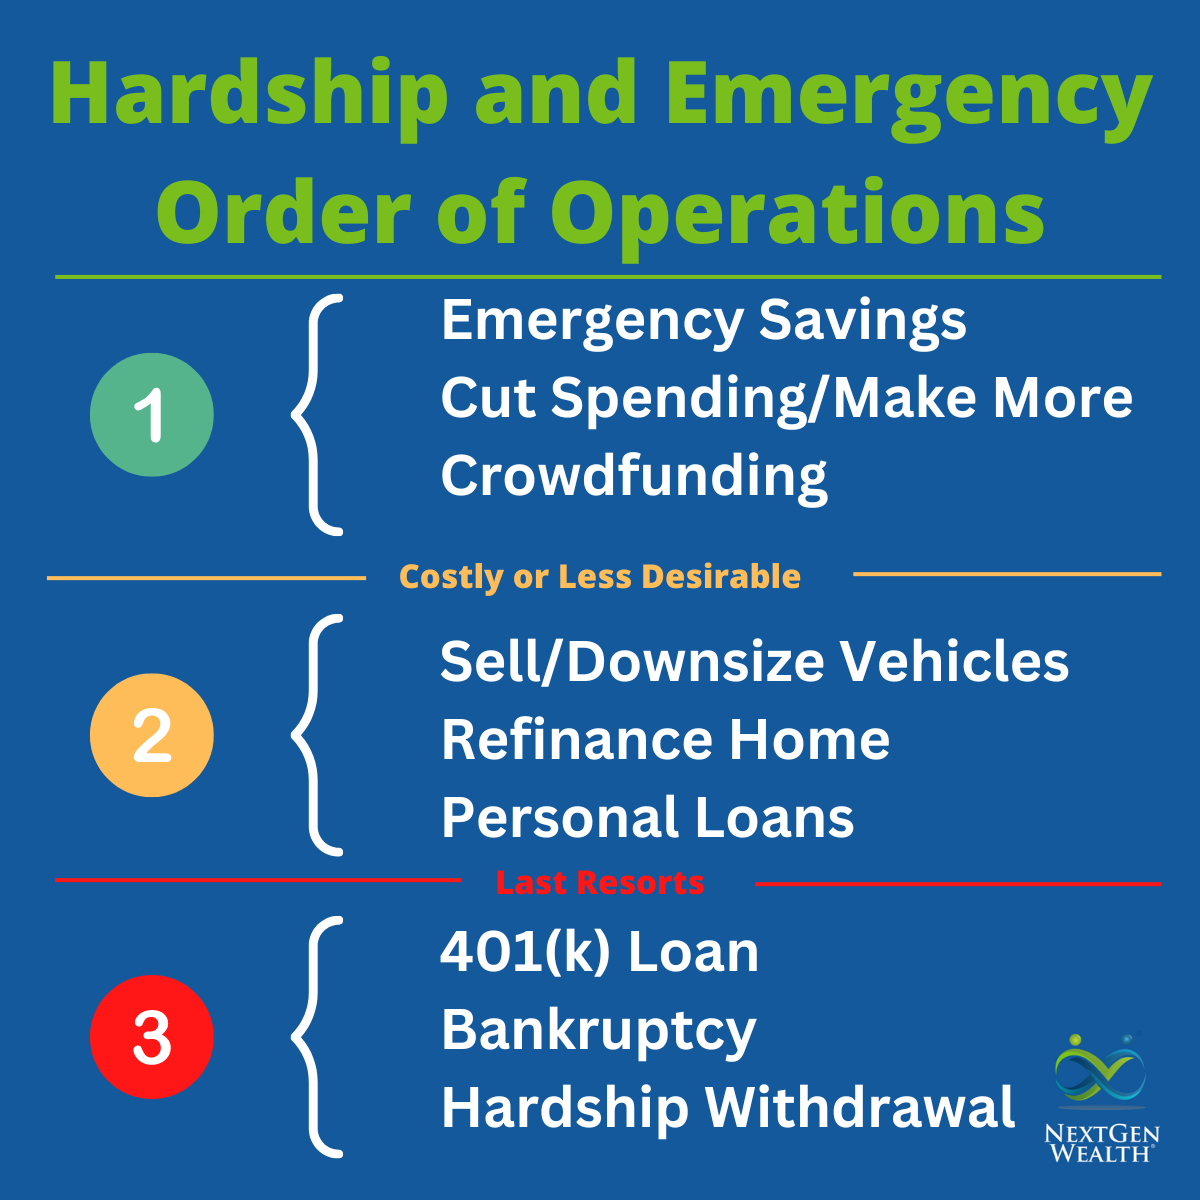 Hardship and Emergency Order of Operations